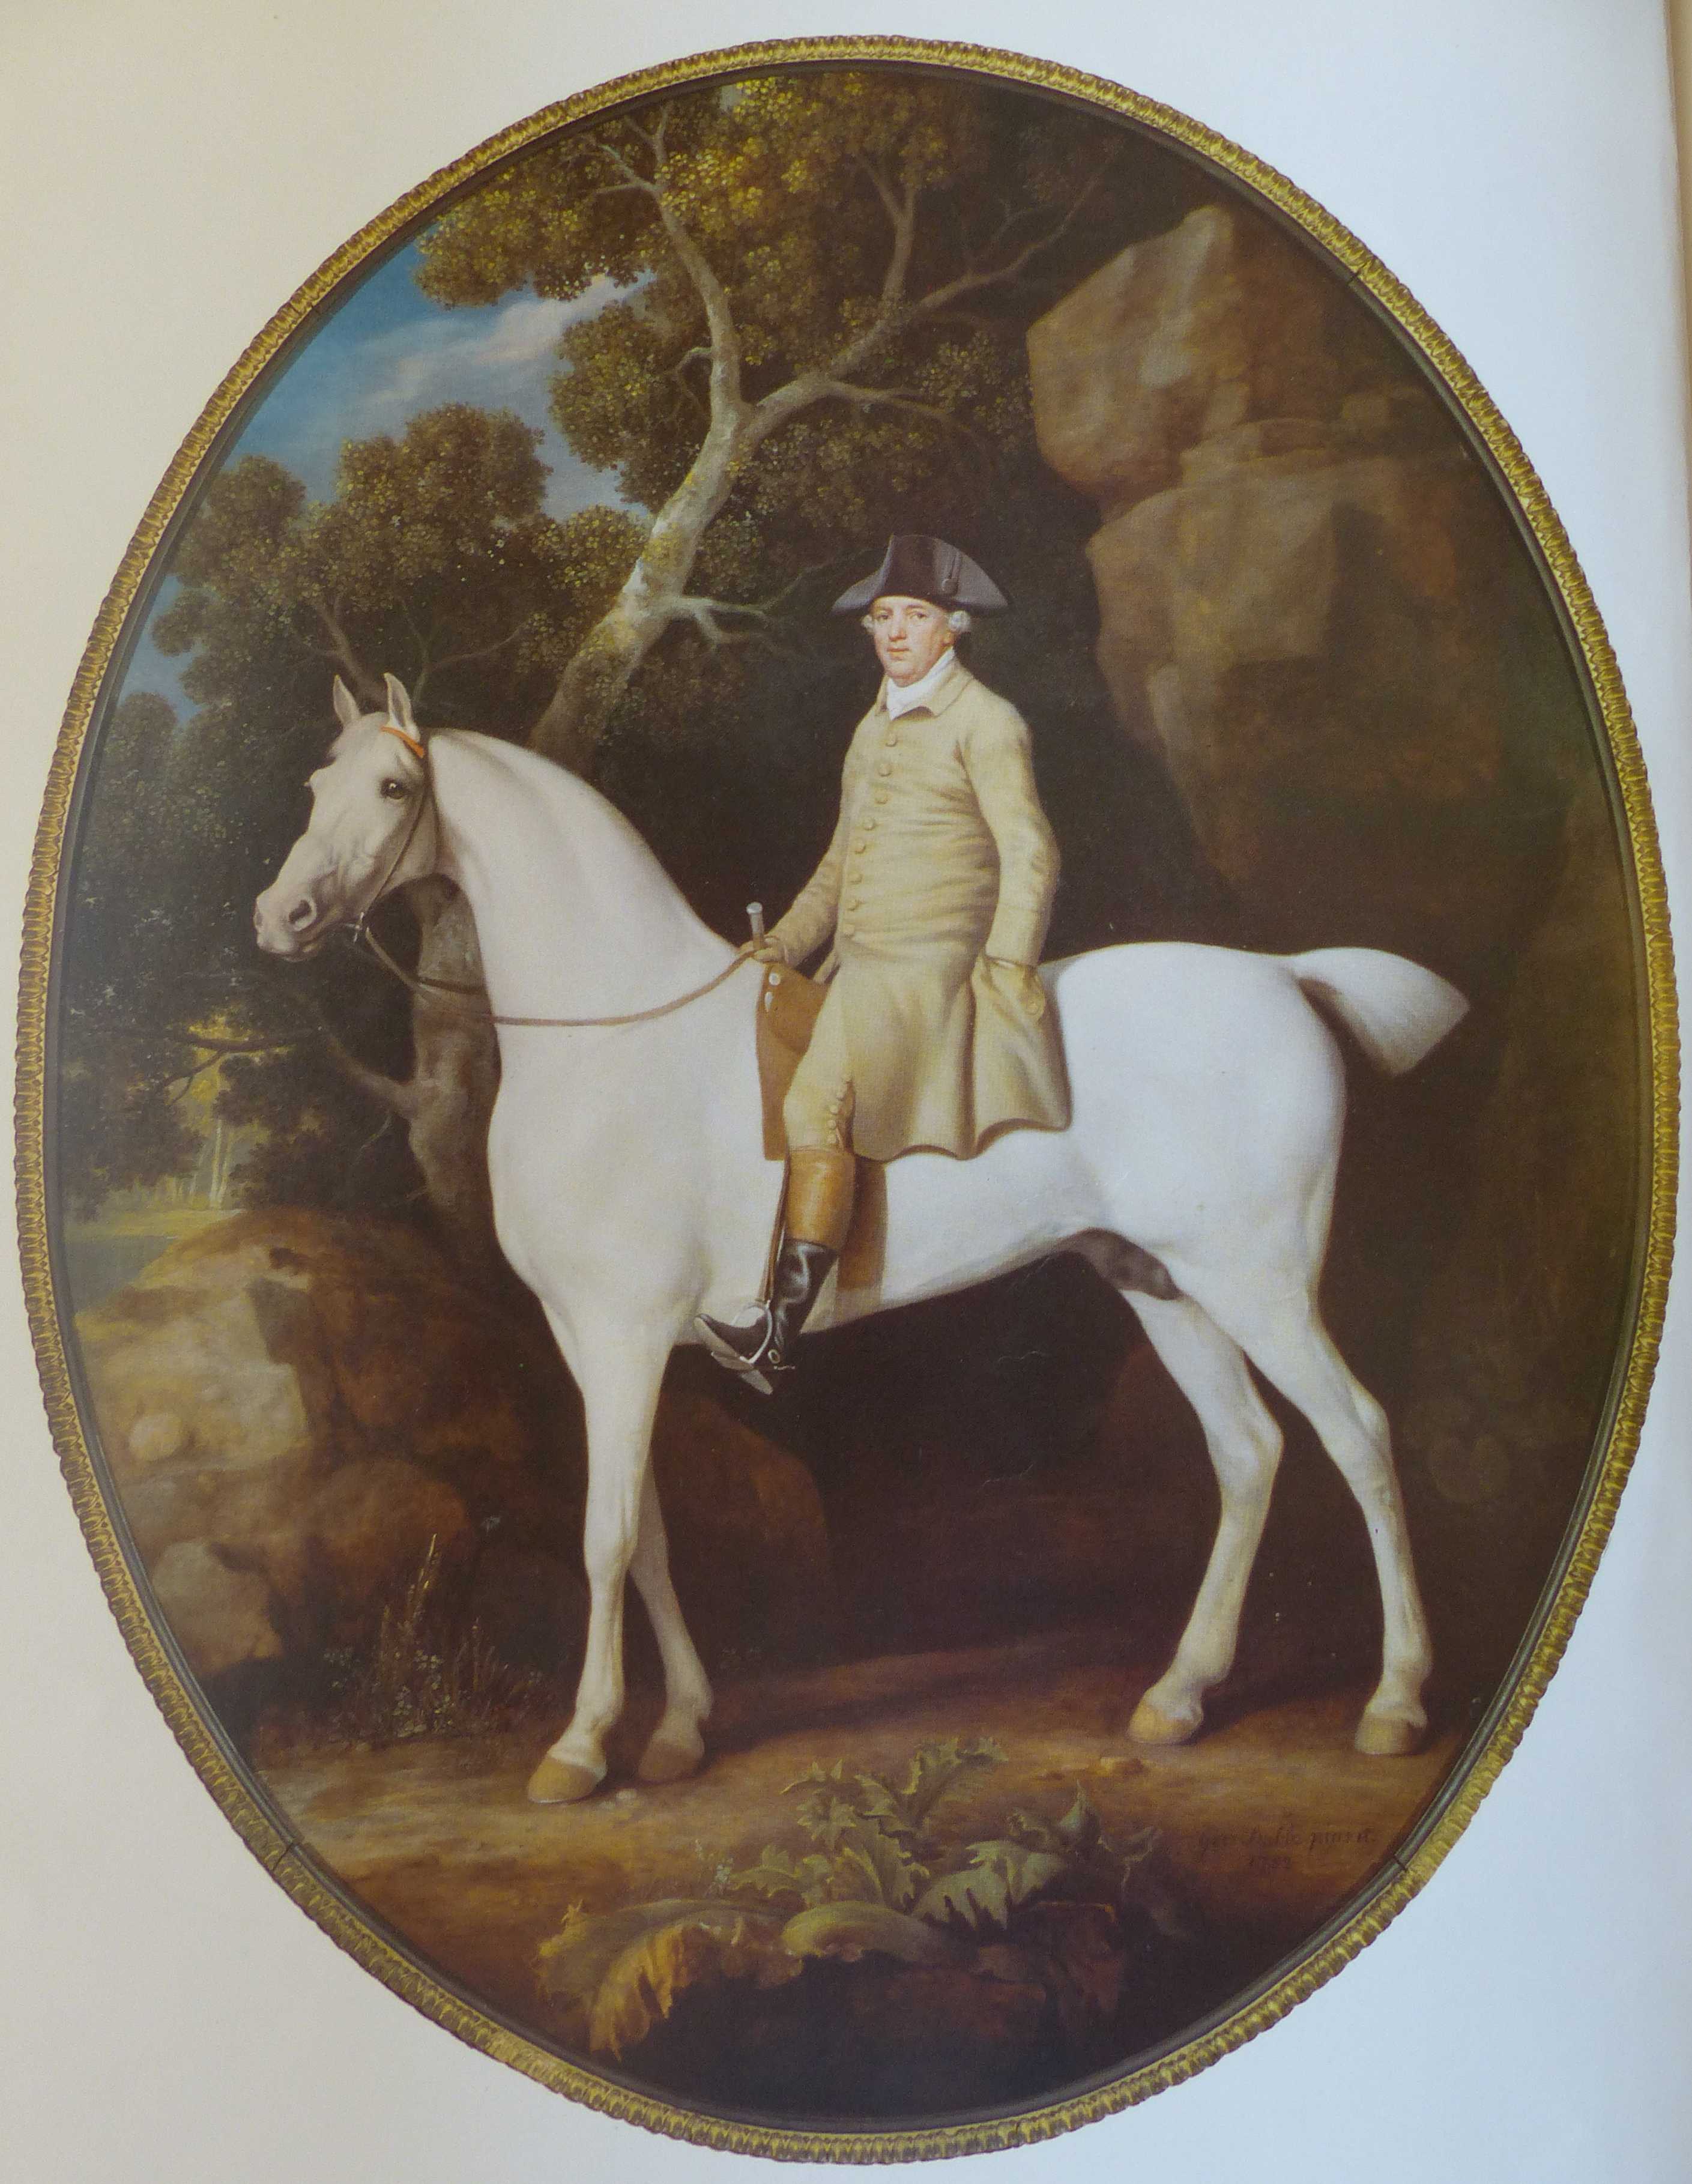  George Stubbs
 (1724–1806)  





Description
British painter and non-fiction writer

Date of birth/death

24 August 1724 
10 July 1806 

Location of birth/death

Liverpool
London

Work location

London